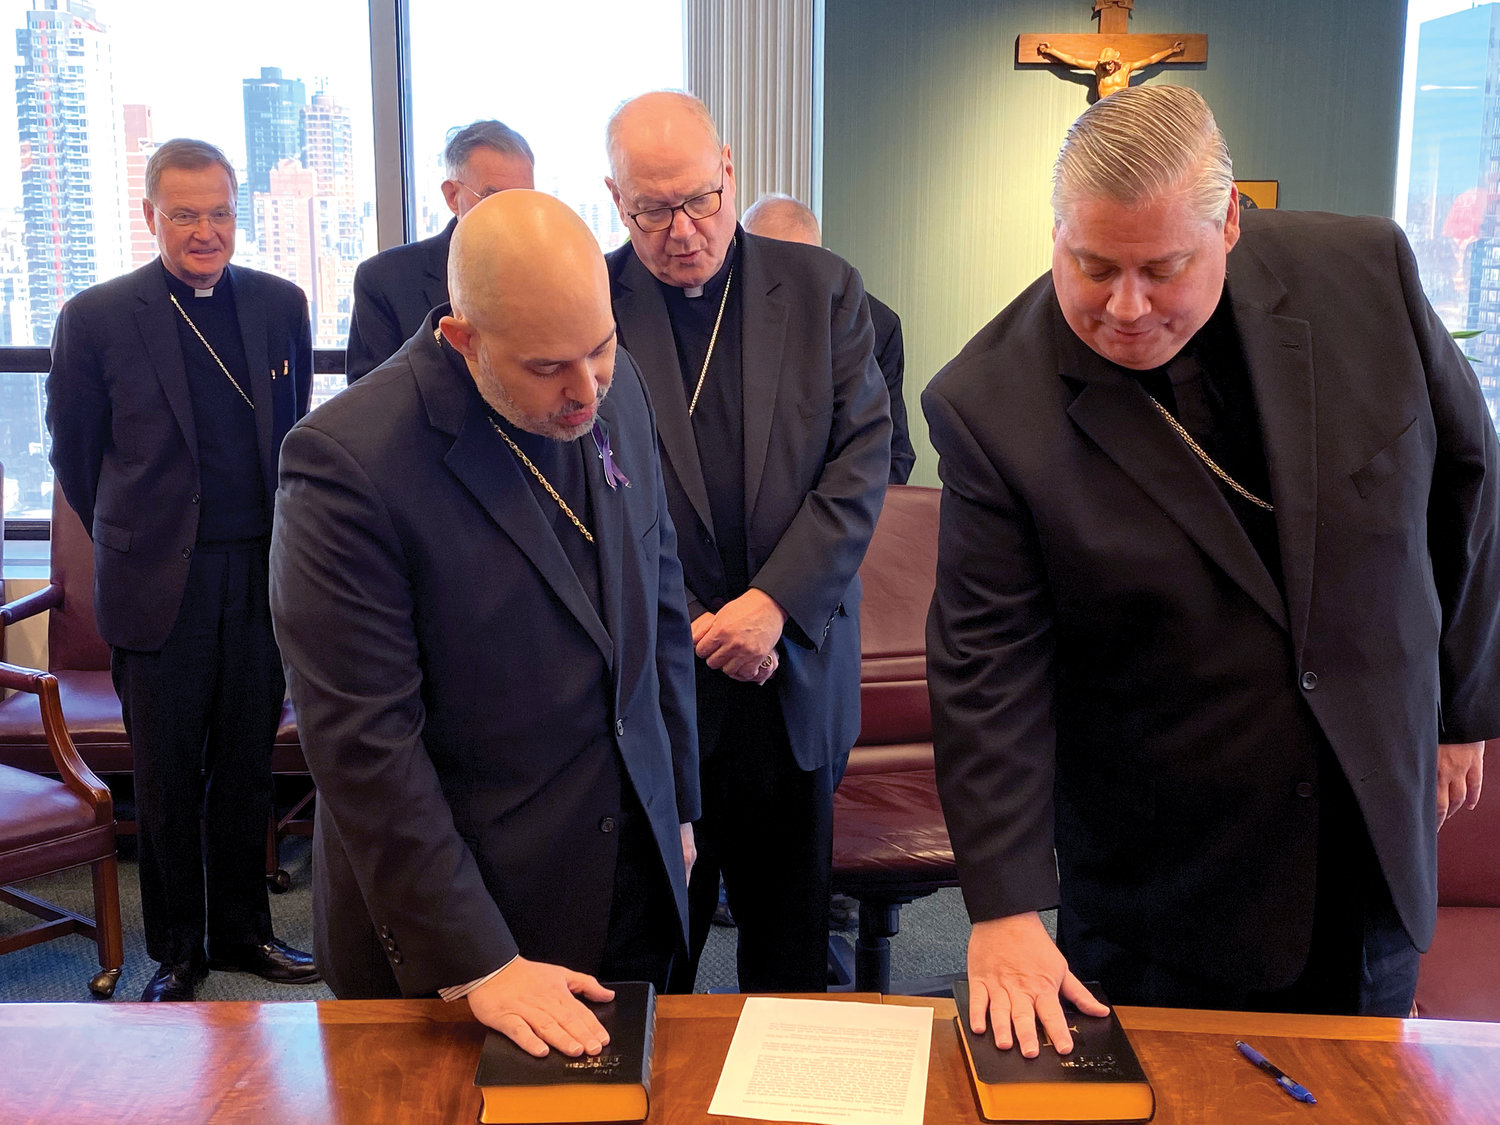 Bishop-elect Joseph Espaillat and Bishop-elect John Bonnici make their oath of fidelity and profession of faith witnessed by Cardinal Dolan Feb. 15 in the New York Catholic Center in Manhattan. The cardinal will ordain them as bishops March 1 in St. Patrick’s Cathedral.